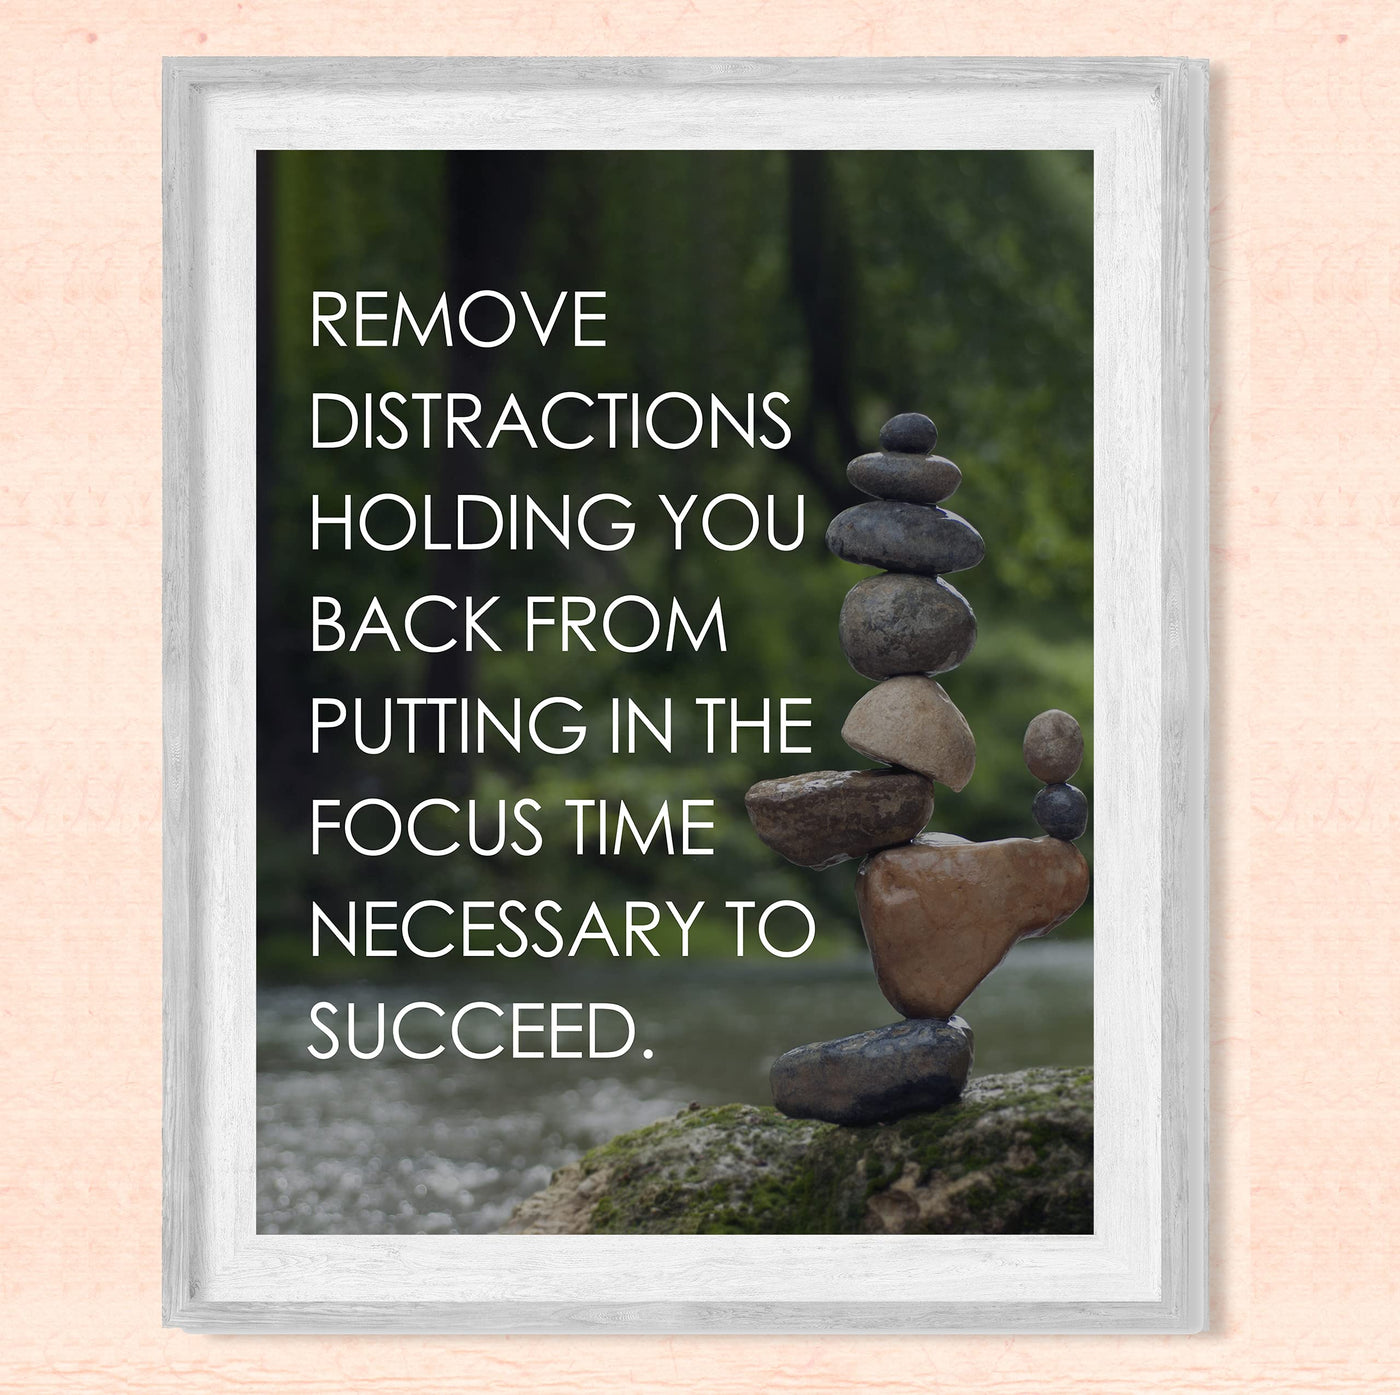 Remove Distractions From Holding You Back Spiritual Quotes Wall Art-8 x 10" River Stones Photo Print-Ready to Frame. Inspirational Home-Office-Yoga Studio-Dorm Decor. Great Zen Gift for Motivation!